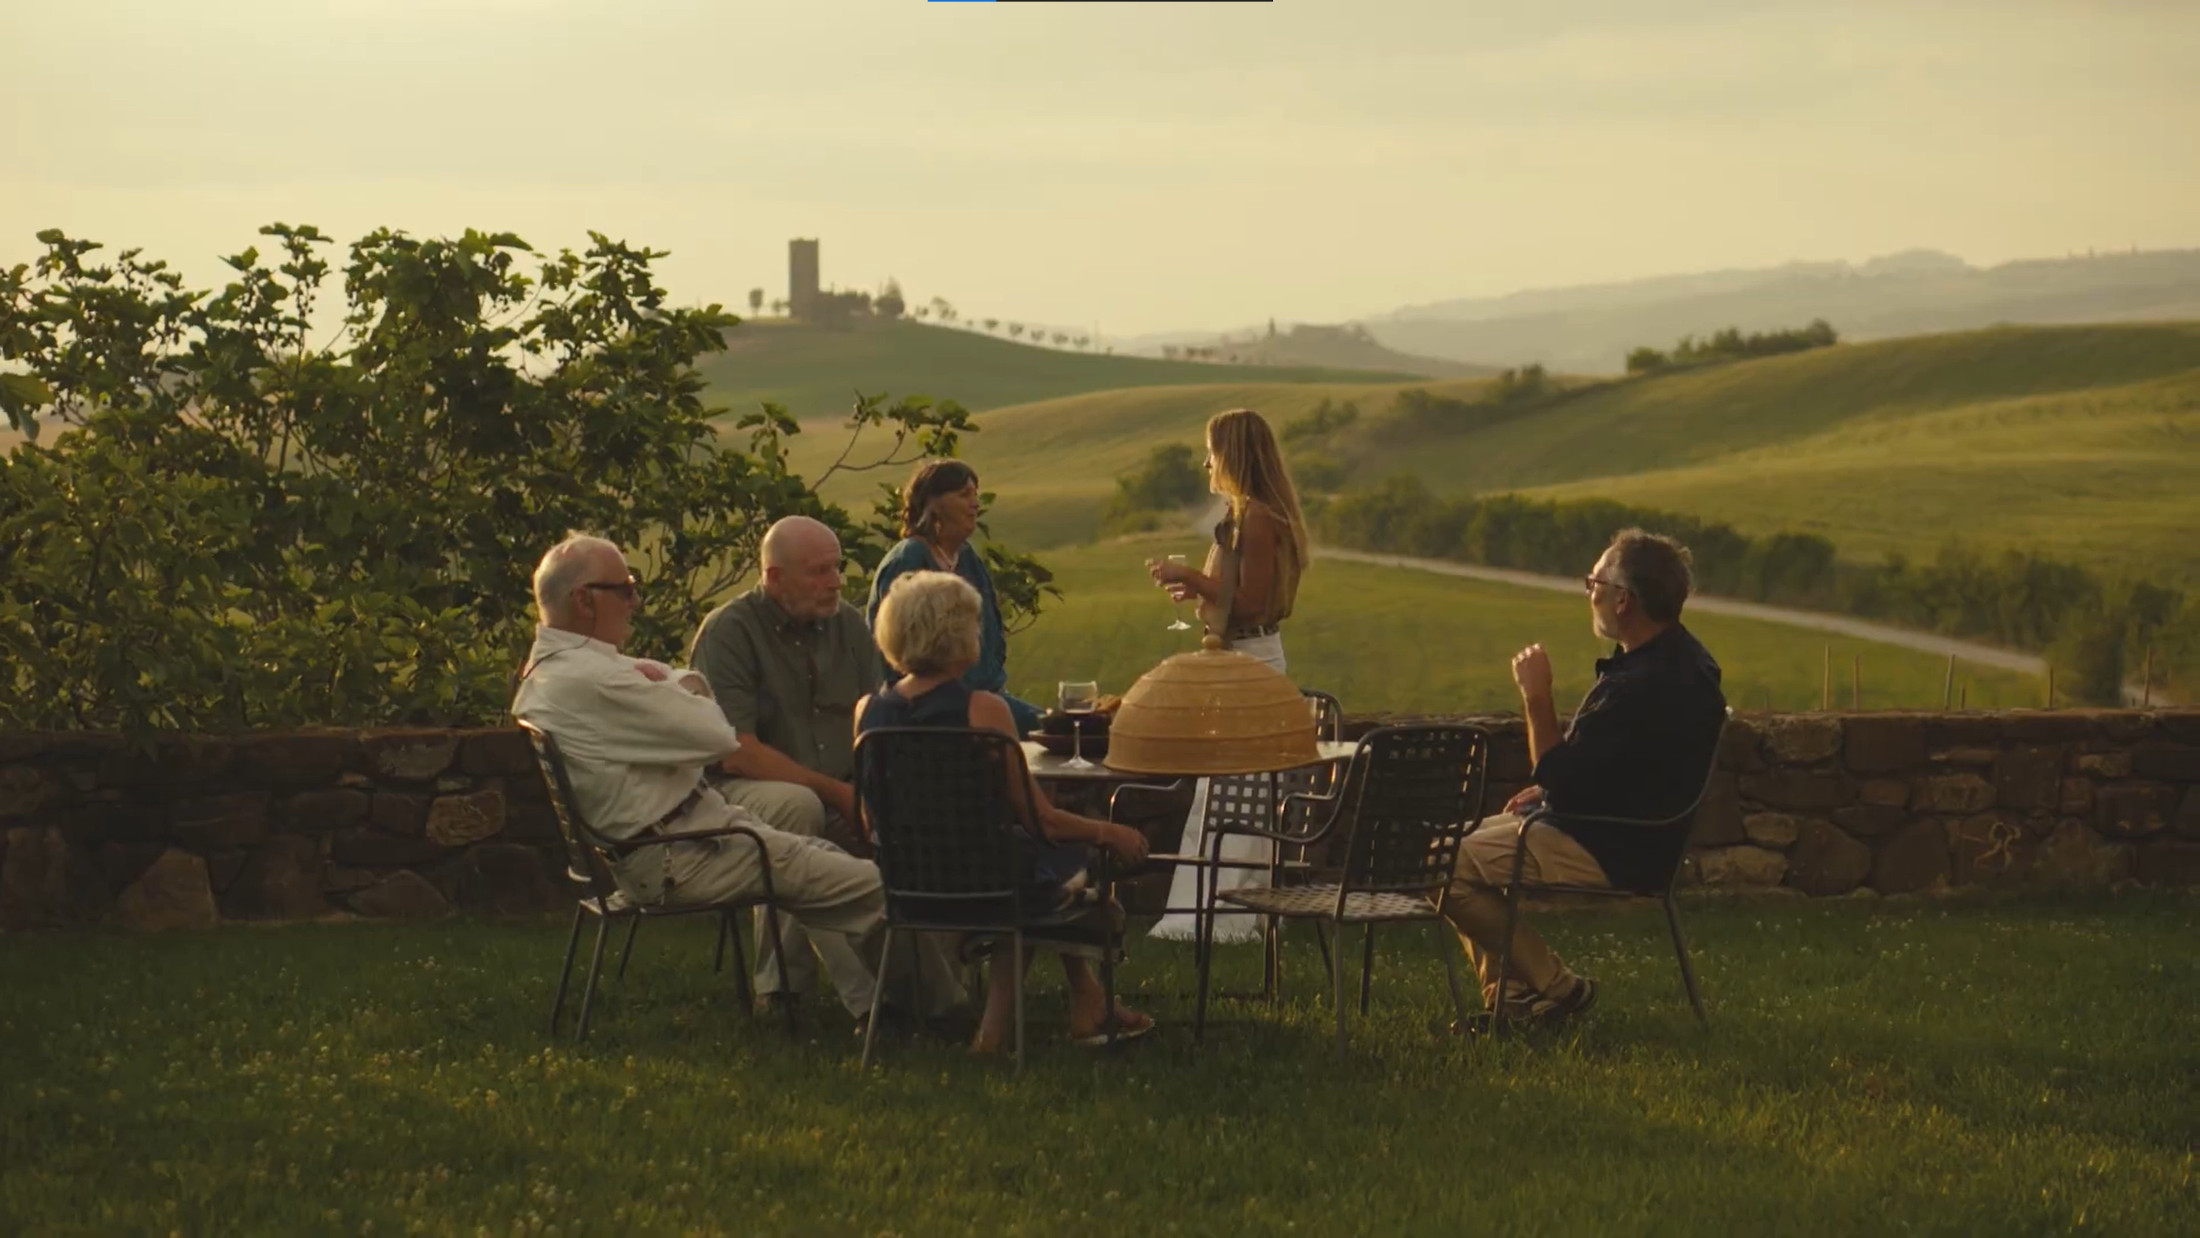 A group of people around a table on the lawn enjoying the sunset on a Tuscan hillside